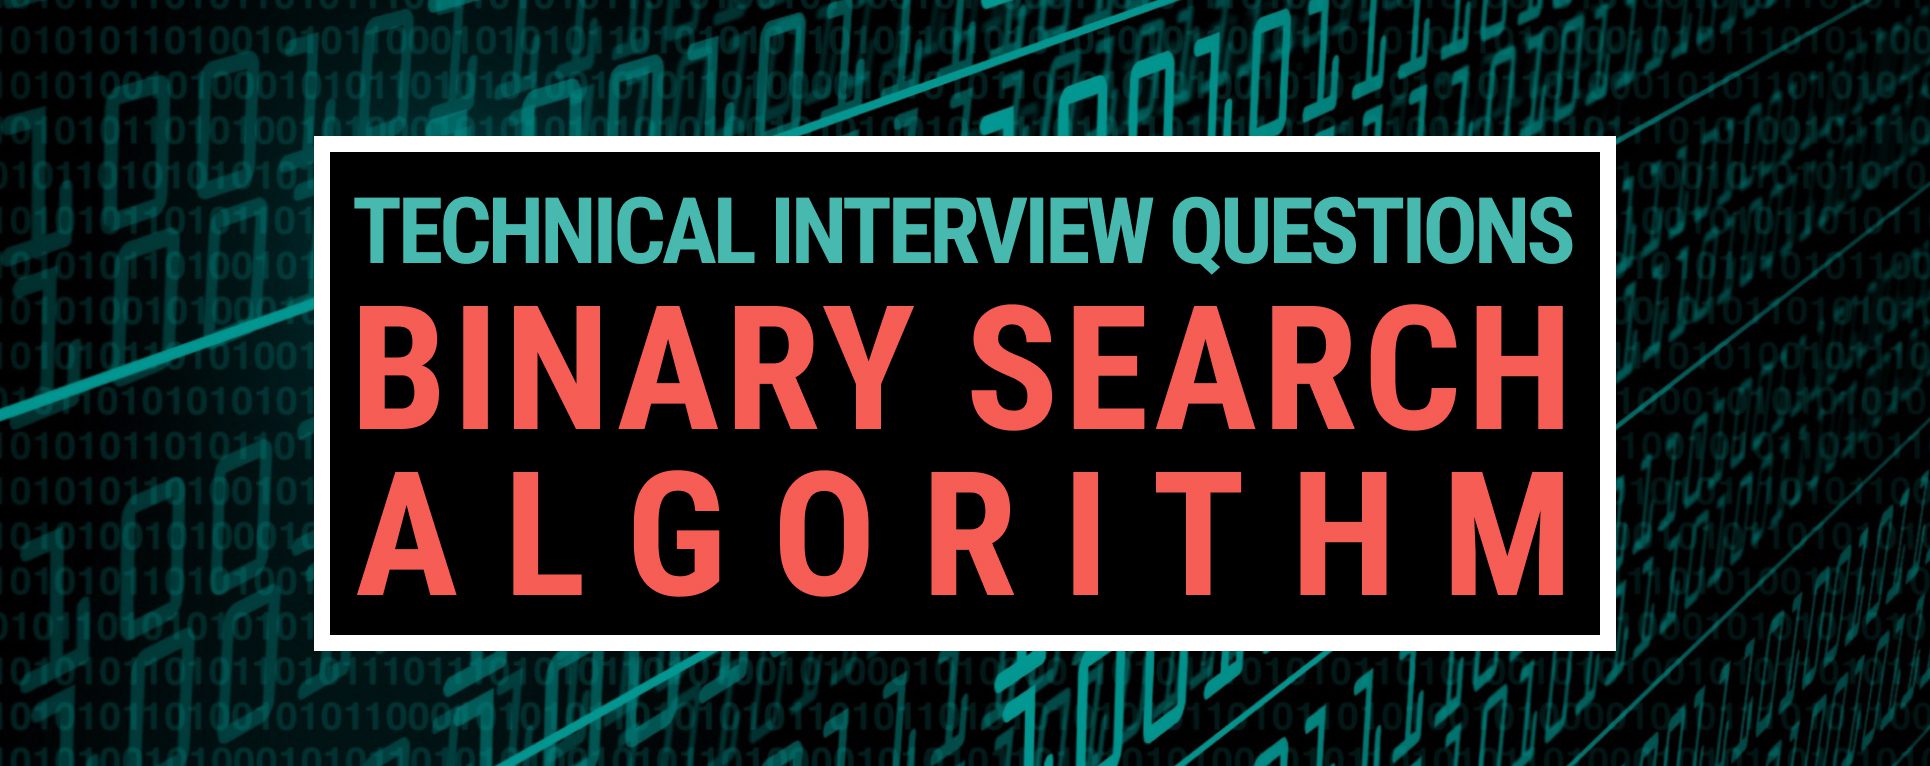 Technical Interview Questions - Binary Search Algorithm